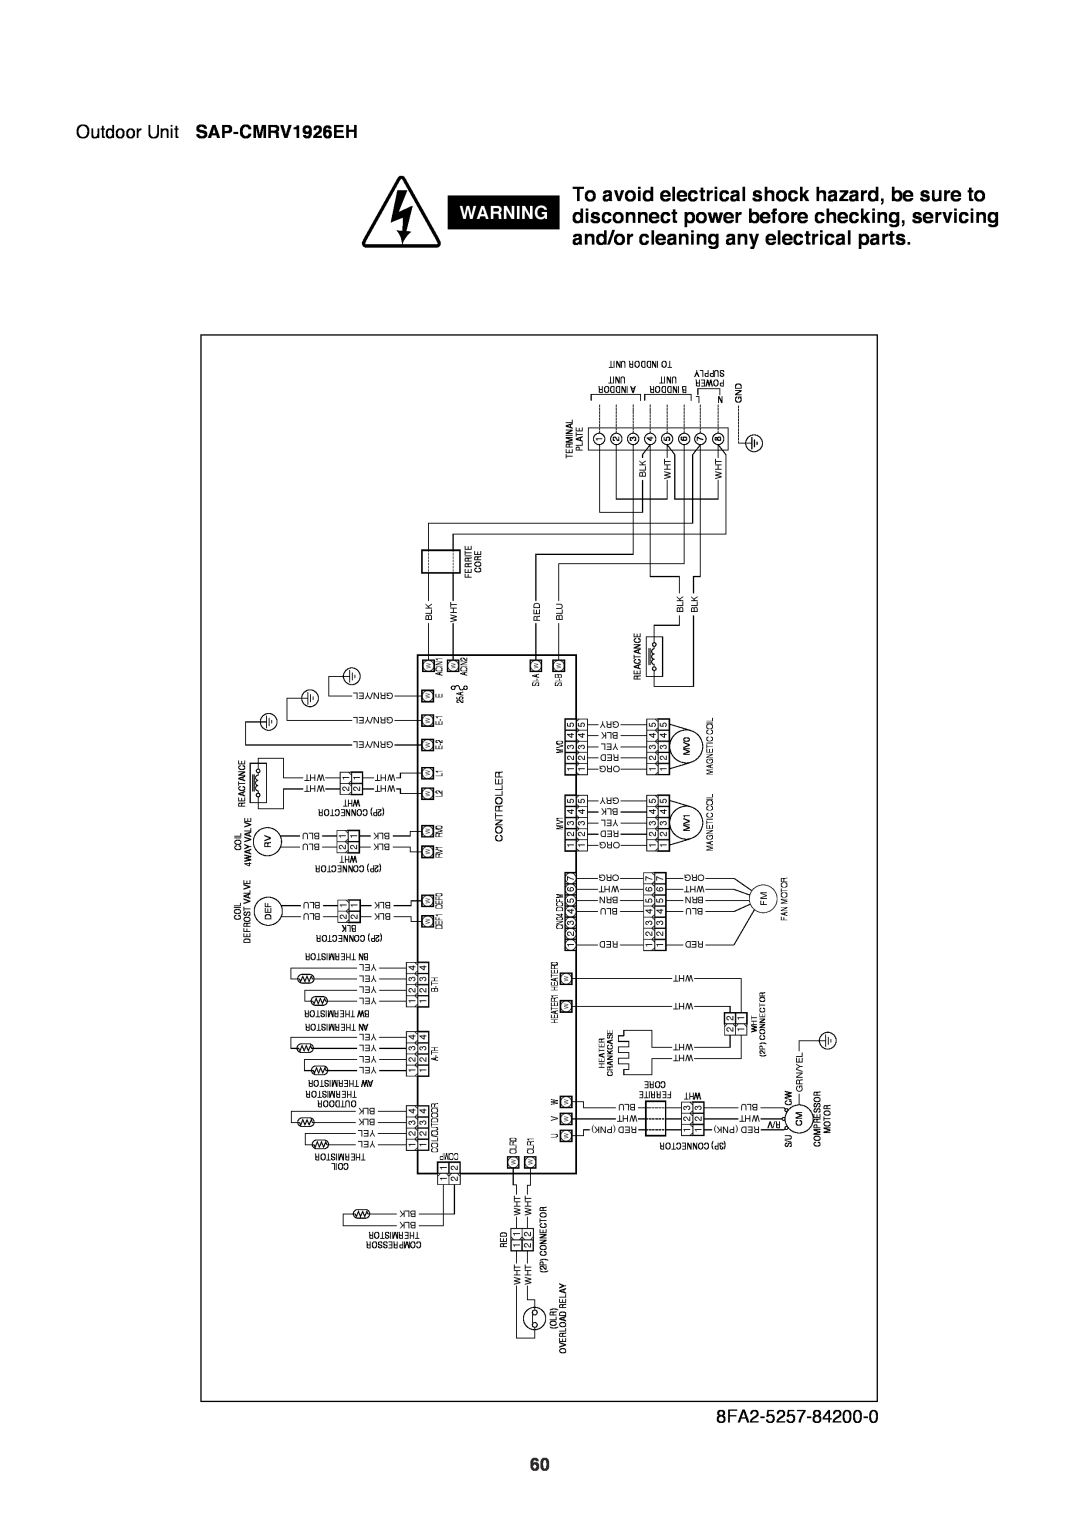 Sanyo SAP-CMRV1426EH-F service manual and/or cleaning any electrical parts, Outdoor Unit SAP-CMRV1926EH 